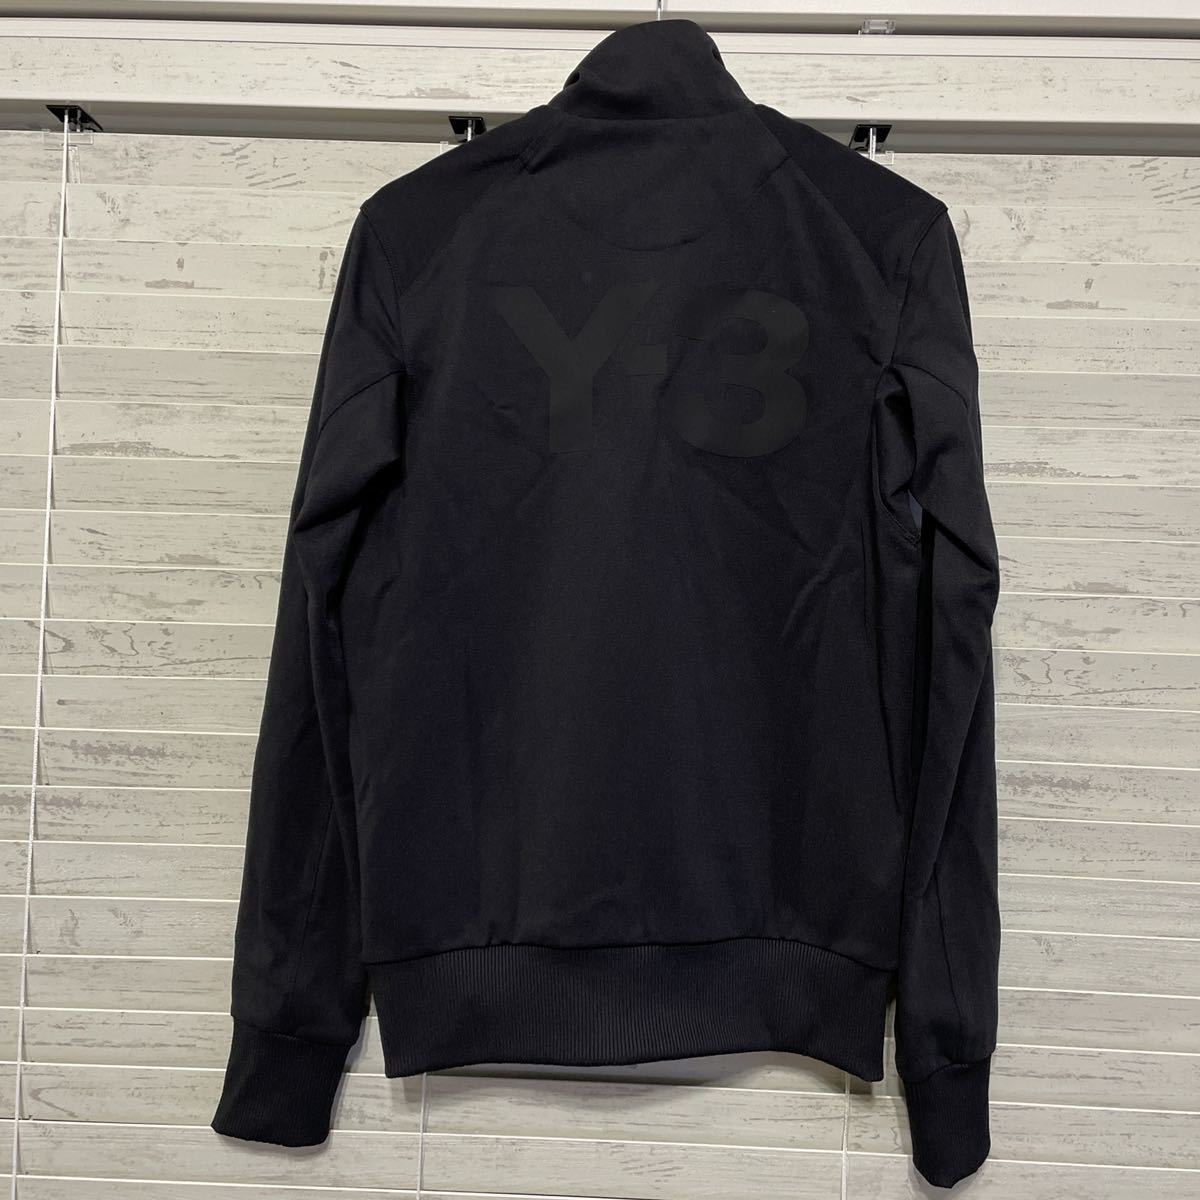 Y-3 セットアップ